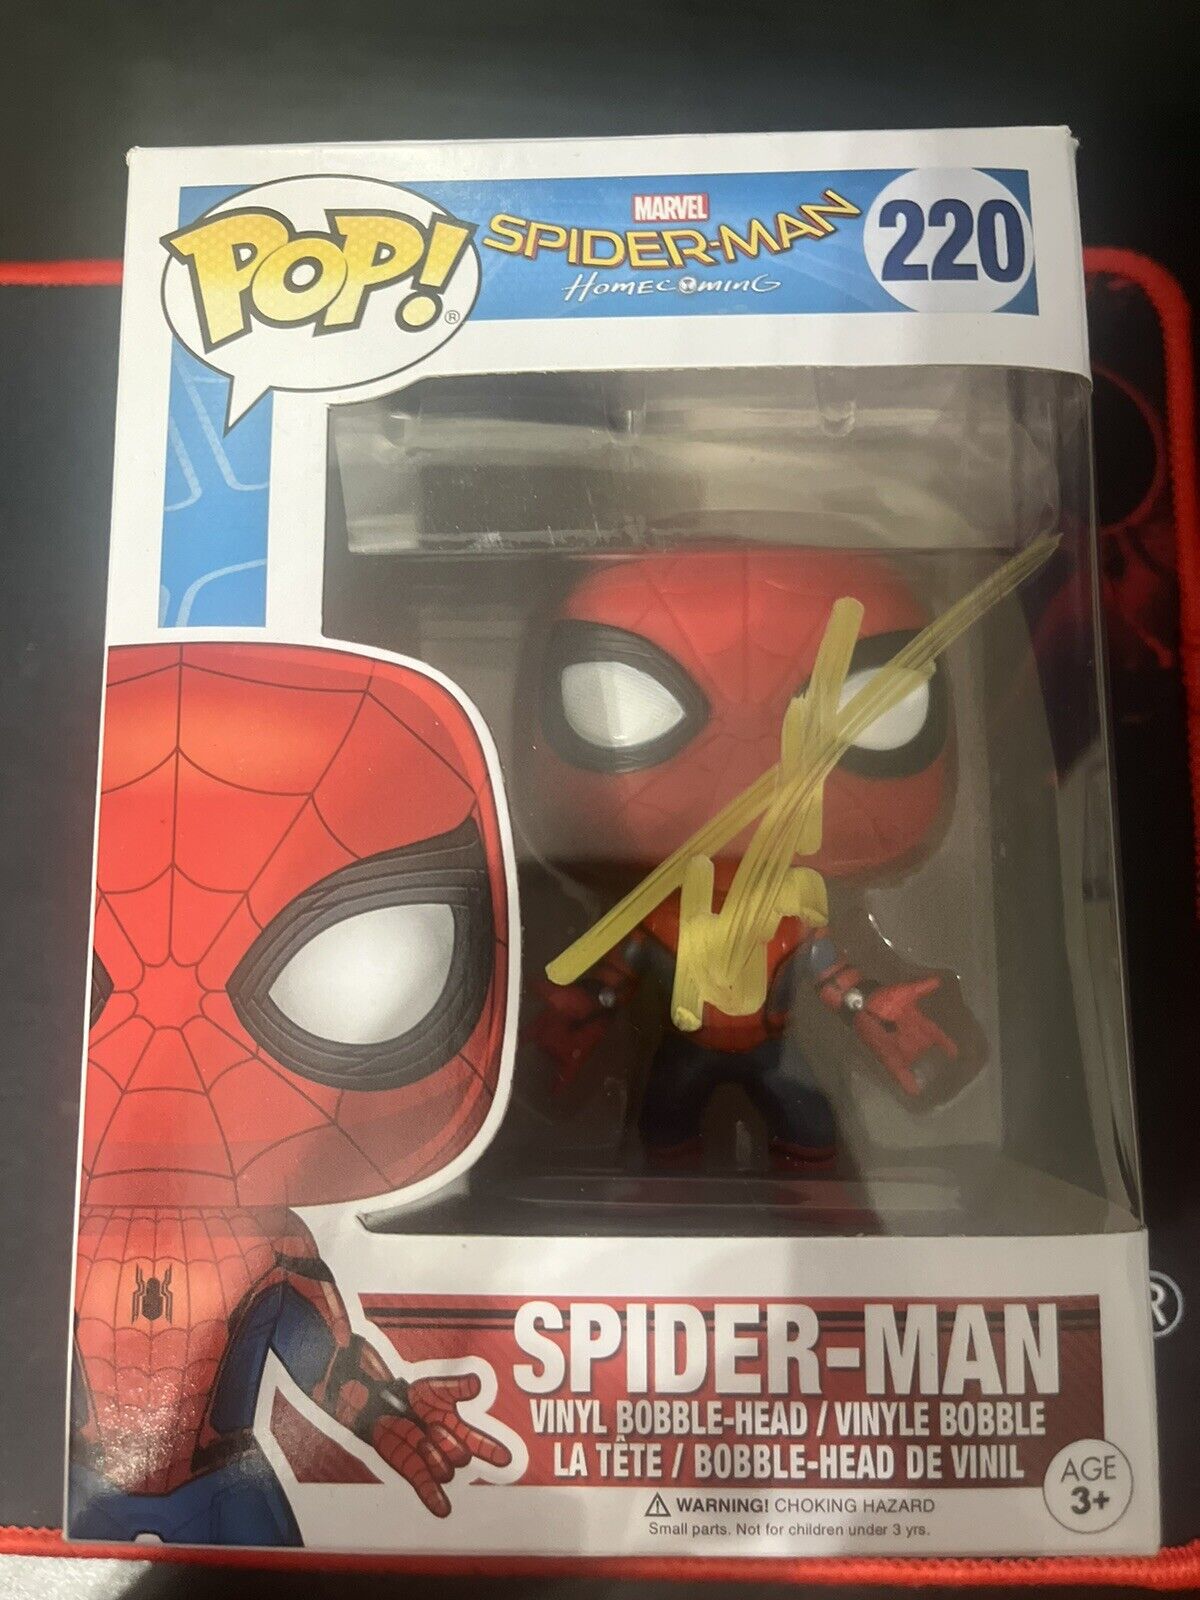 Spiderman 220 Funko Pop Signed By Tom holland